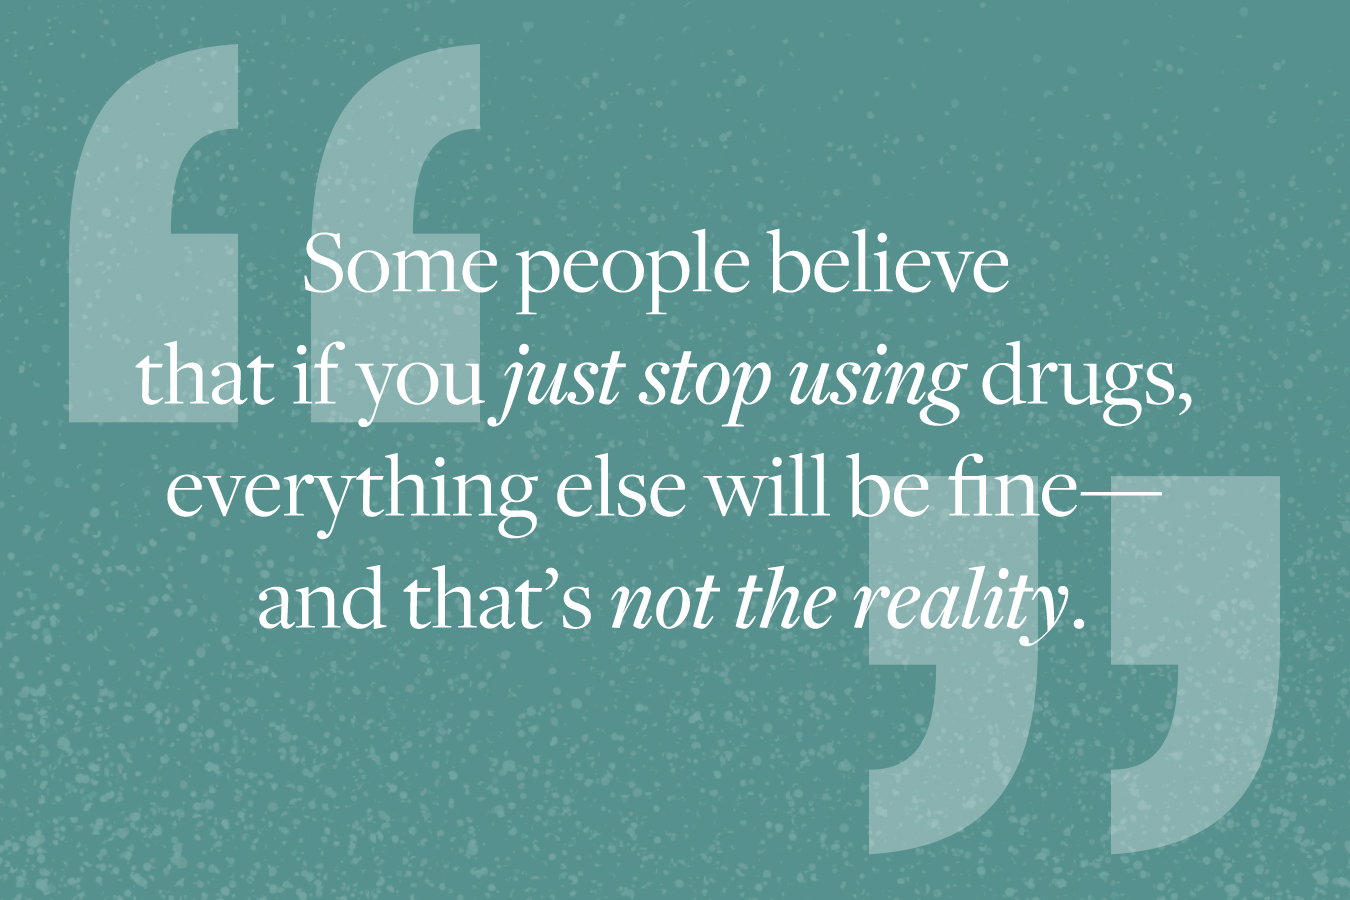 Graphic image of quote from story: "Some people believe that if you just stop using drugs, everything else will be fine--and that's not the reality." 